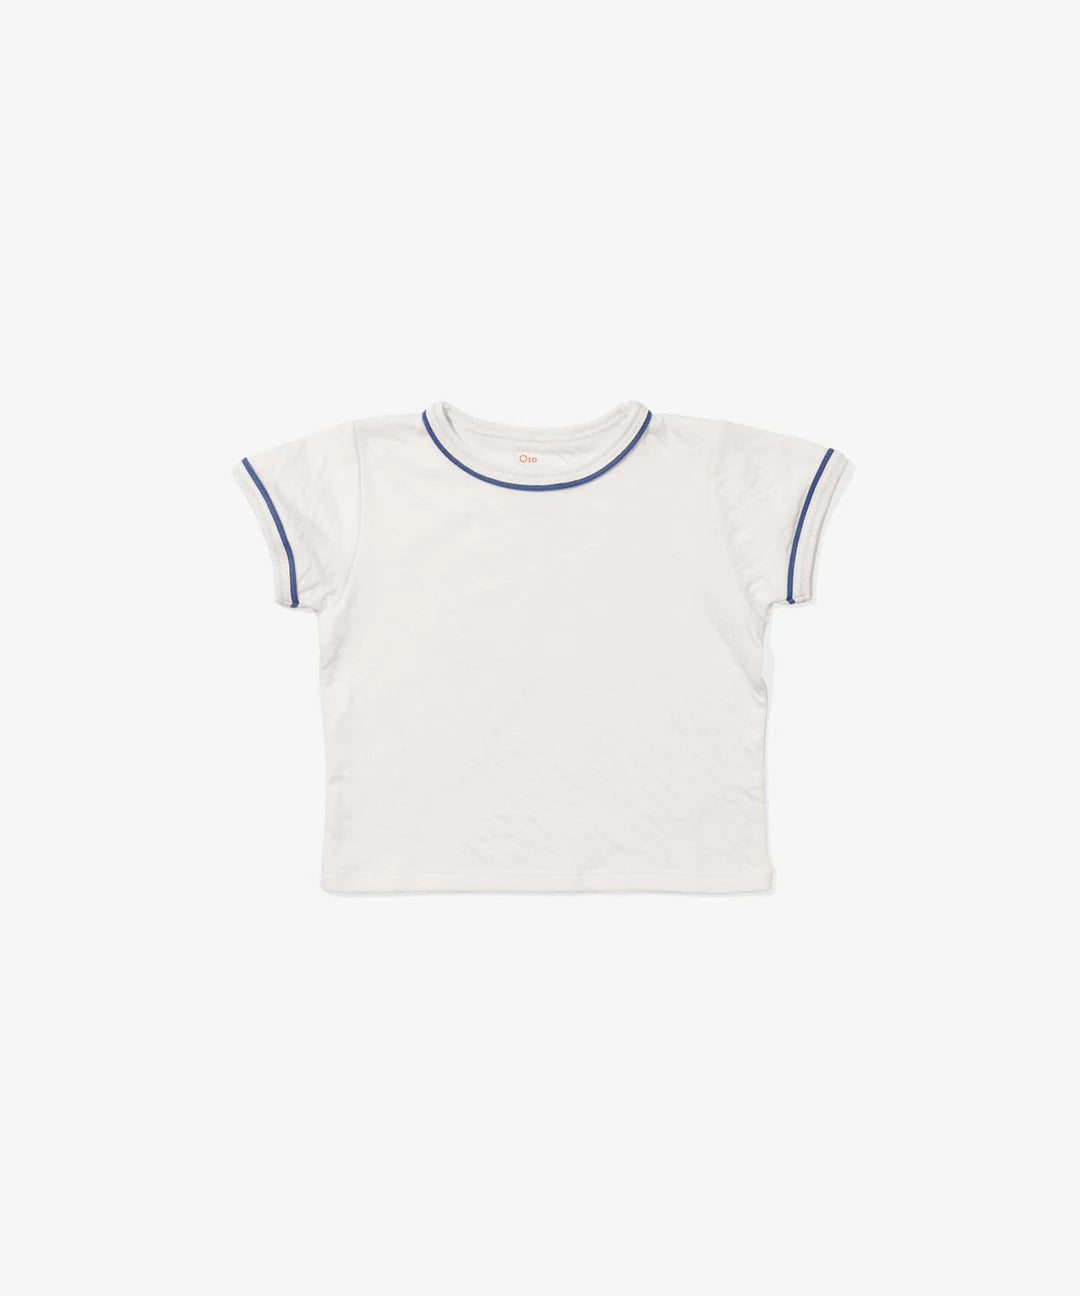 Oso & Me Willie Baby T-Shirt in Navy Piping